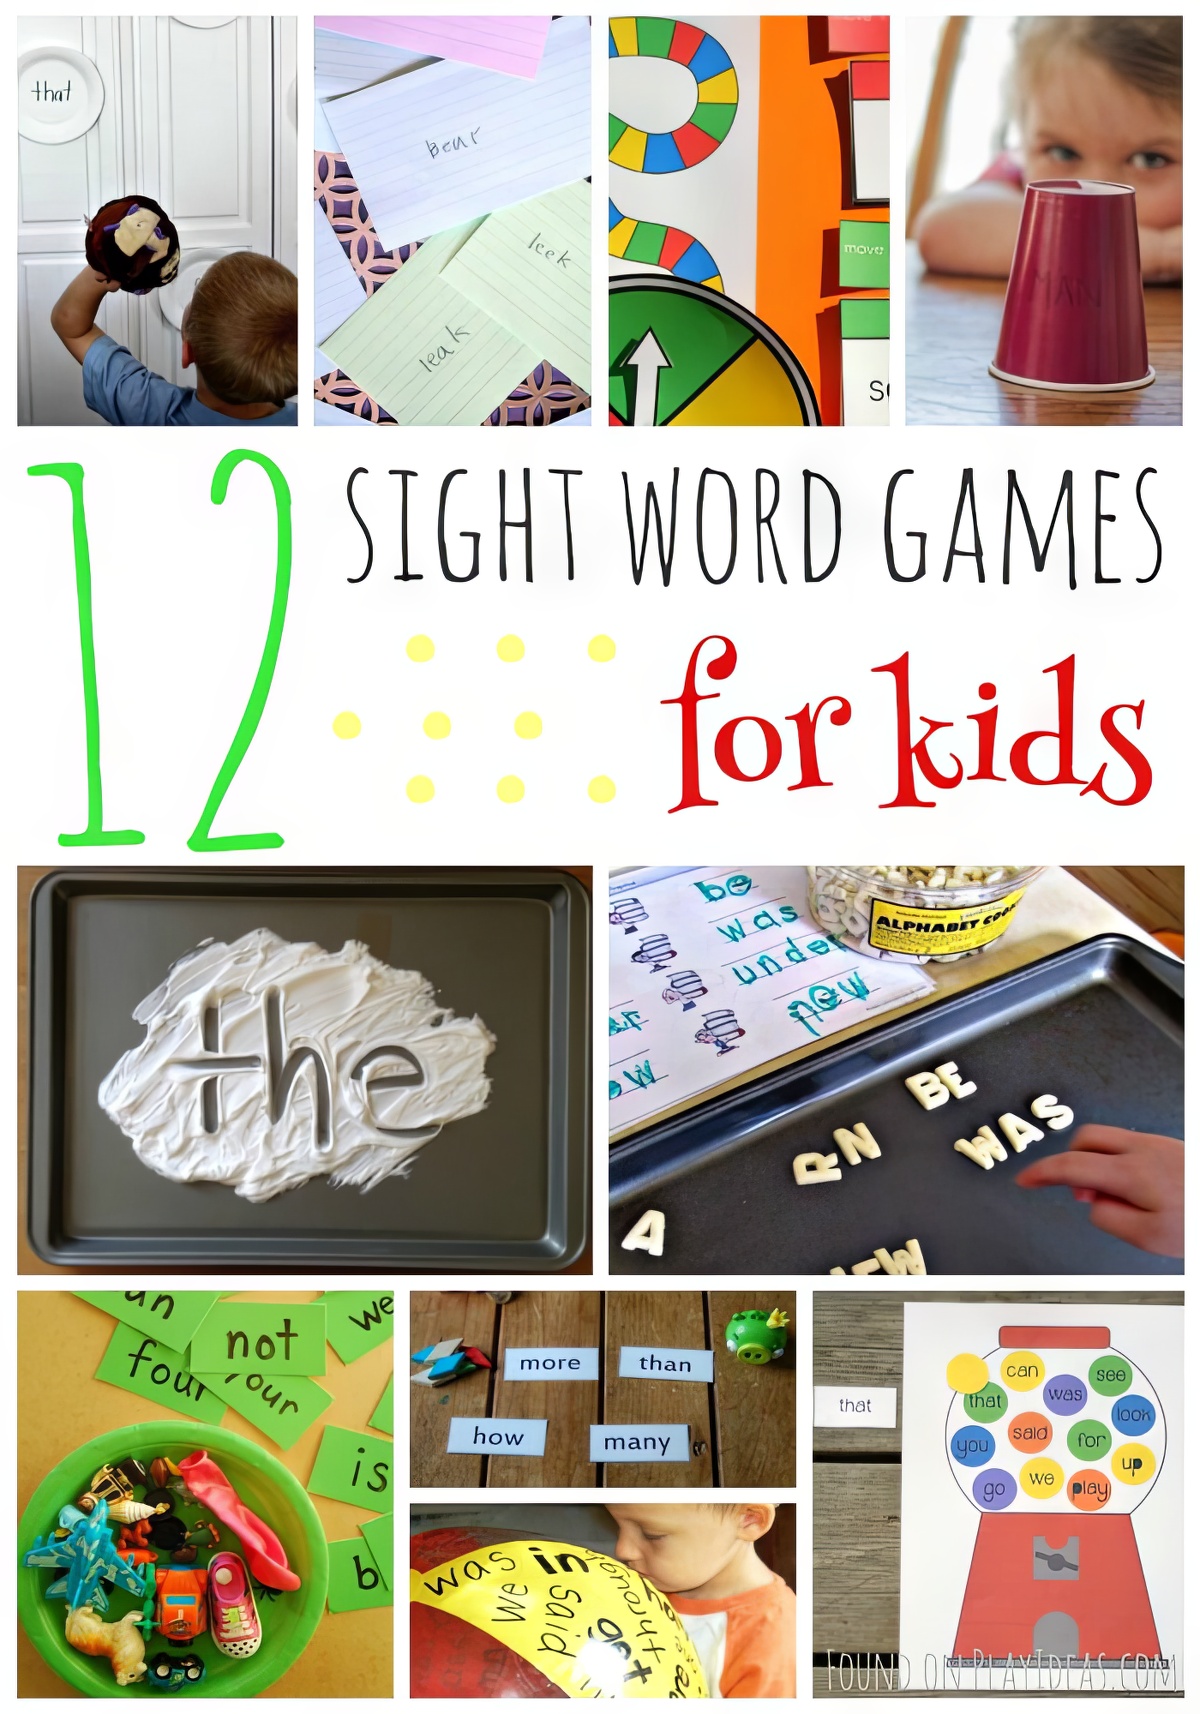 Be creative and enjoy these 12 sight words game ideas with your kids!